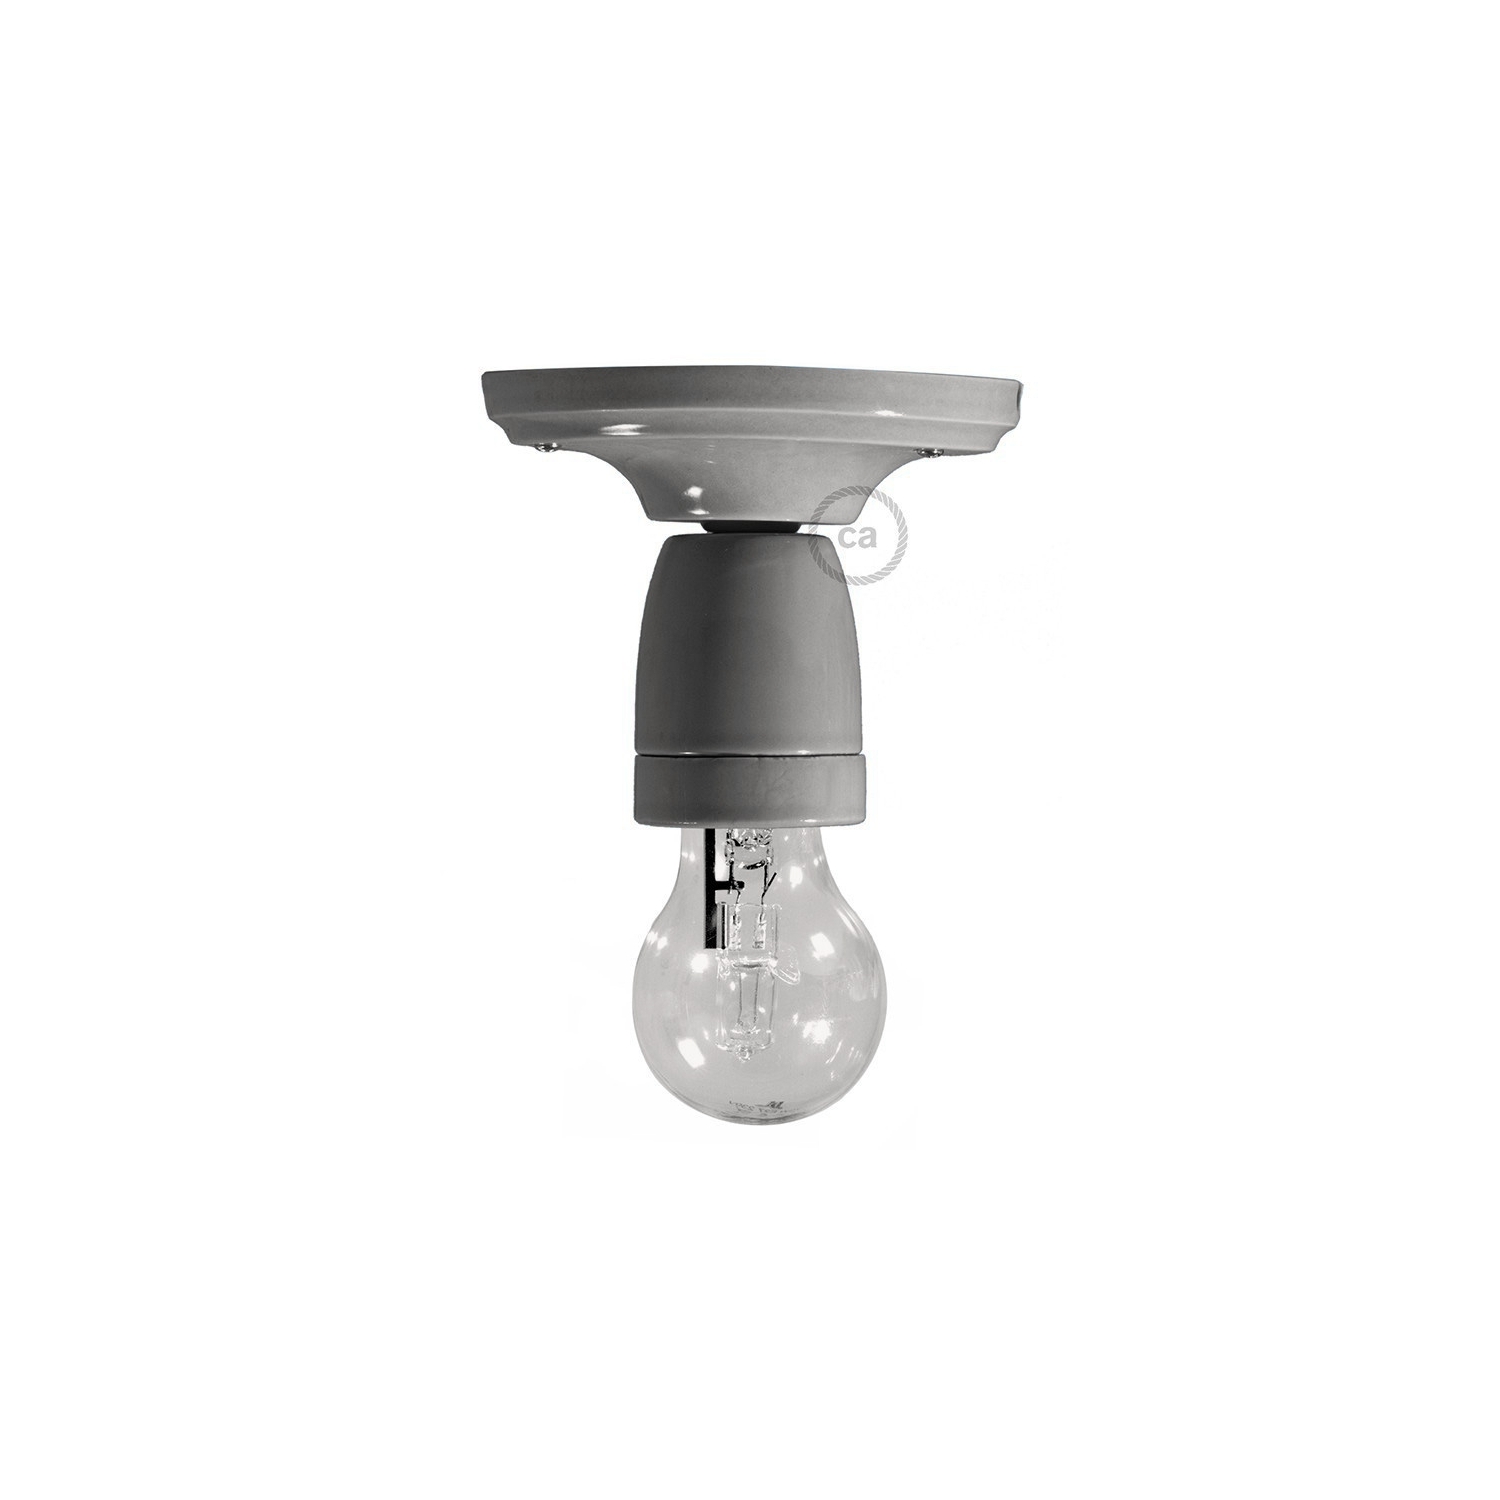 Fermaluce Classic, the wall or ceiling light source in gray porcelain.